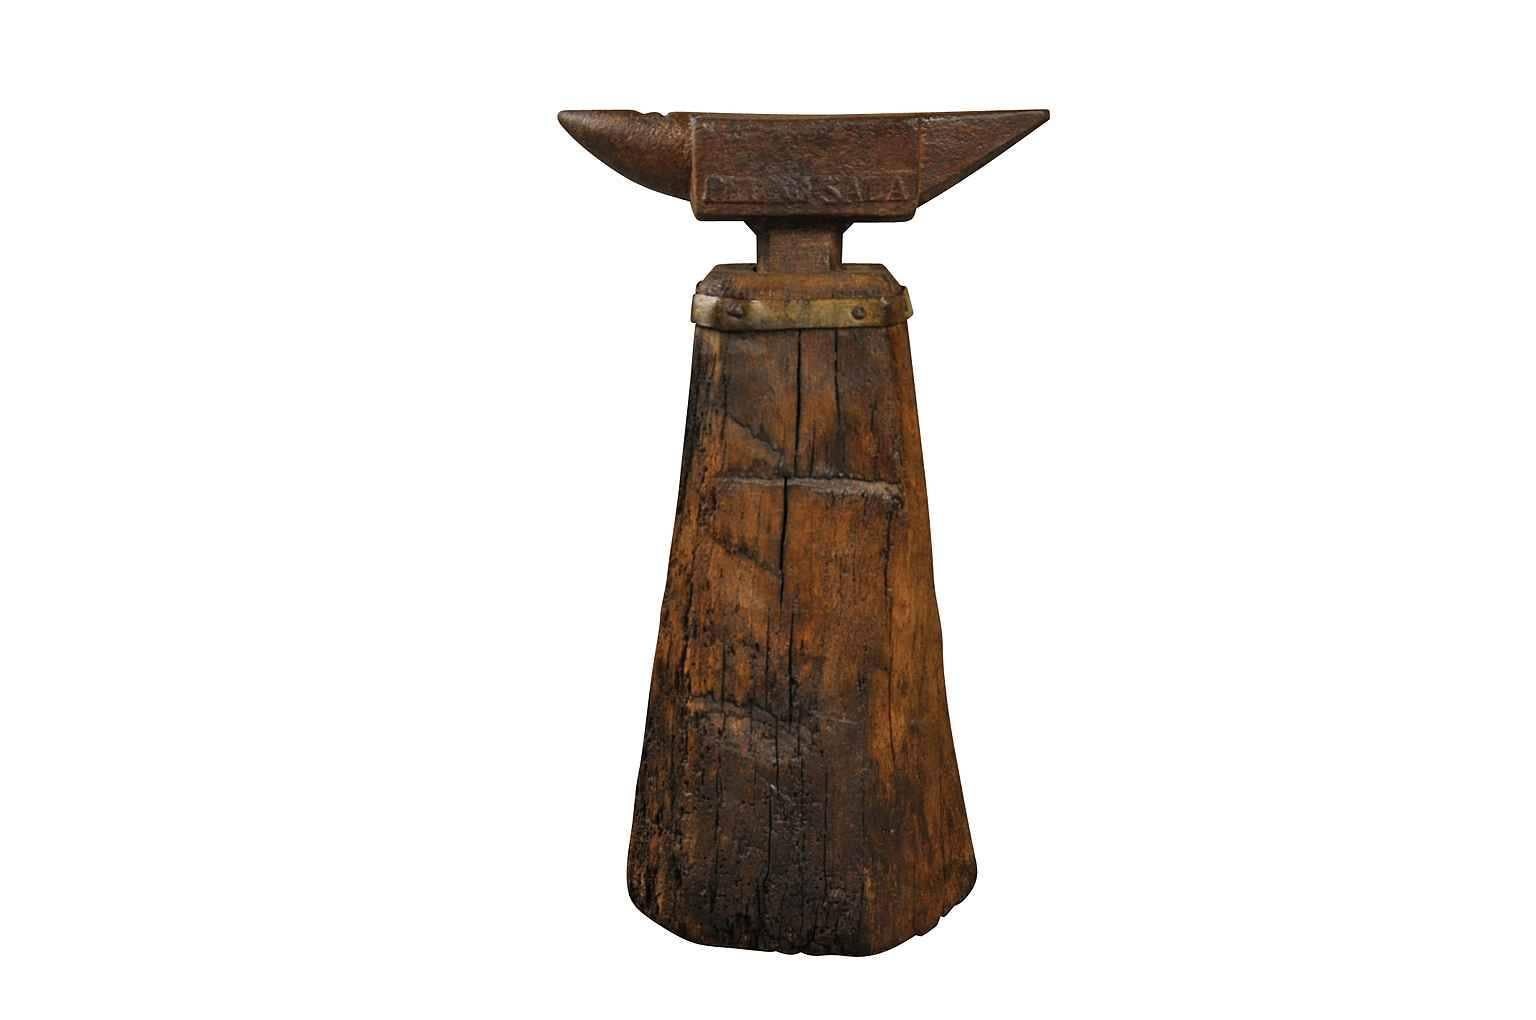 A terrific 19th century Enclume, anvil from the Catalan region of Spain. This anvil retains its original wooden base with iron fittings. A super piece of artwork or sculpture.